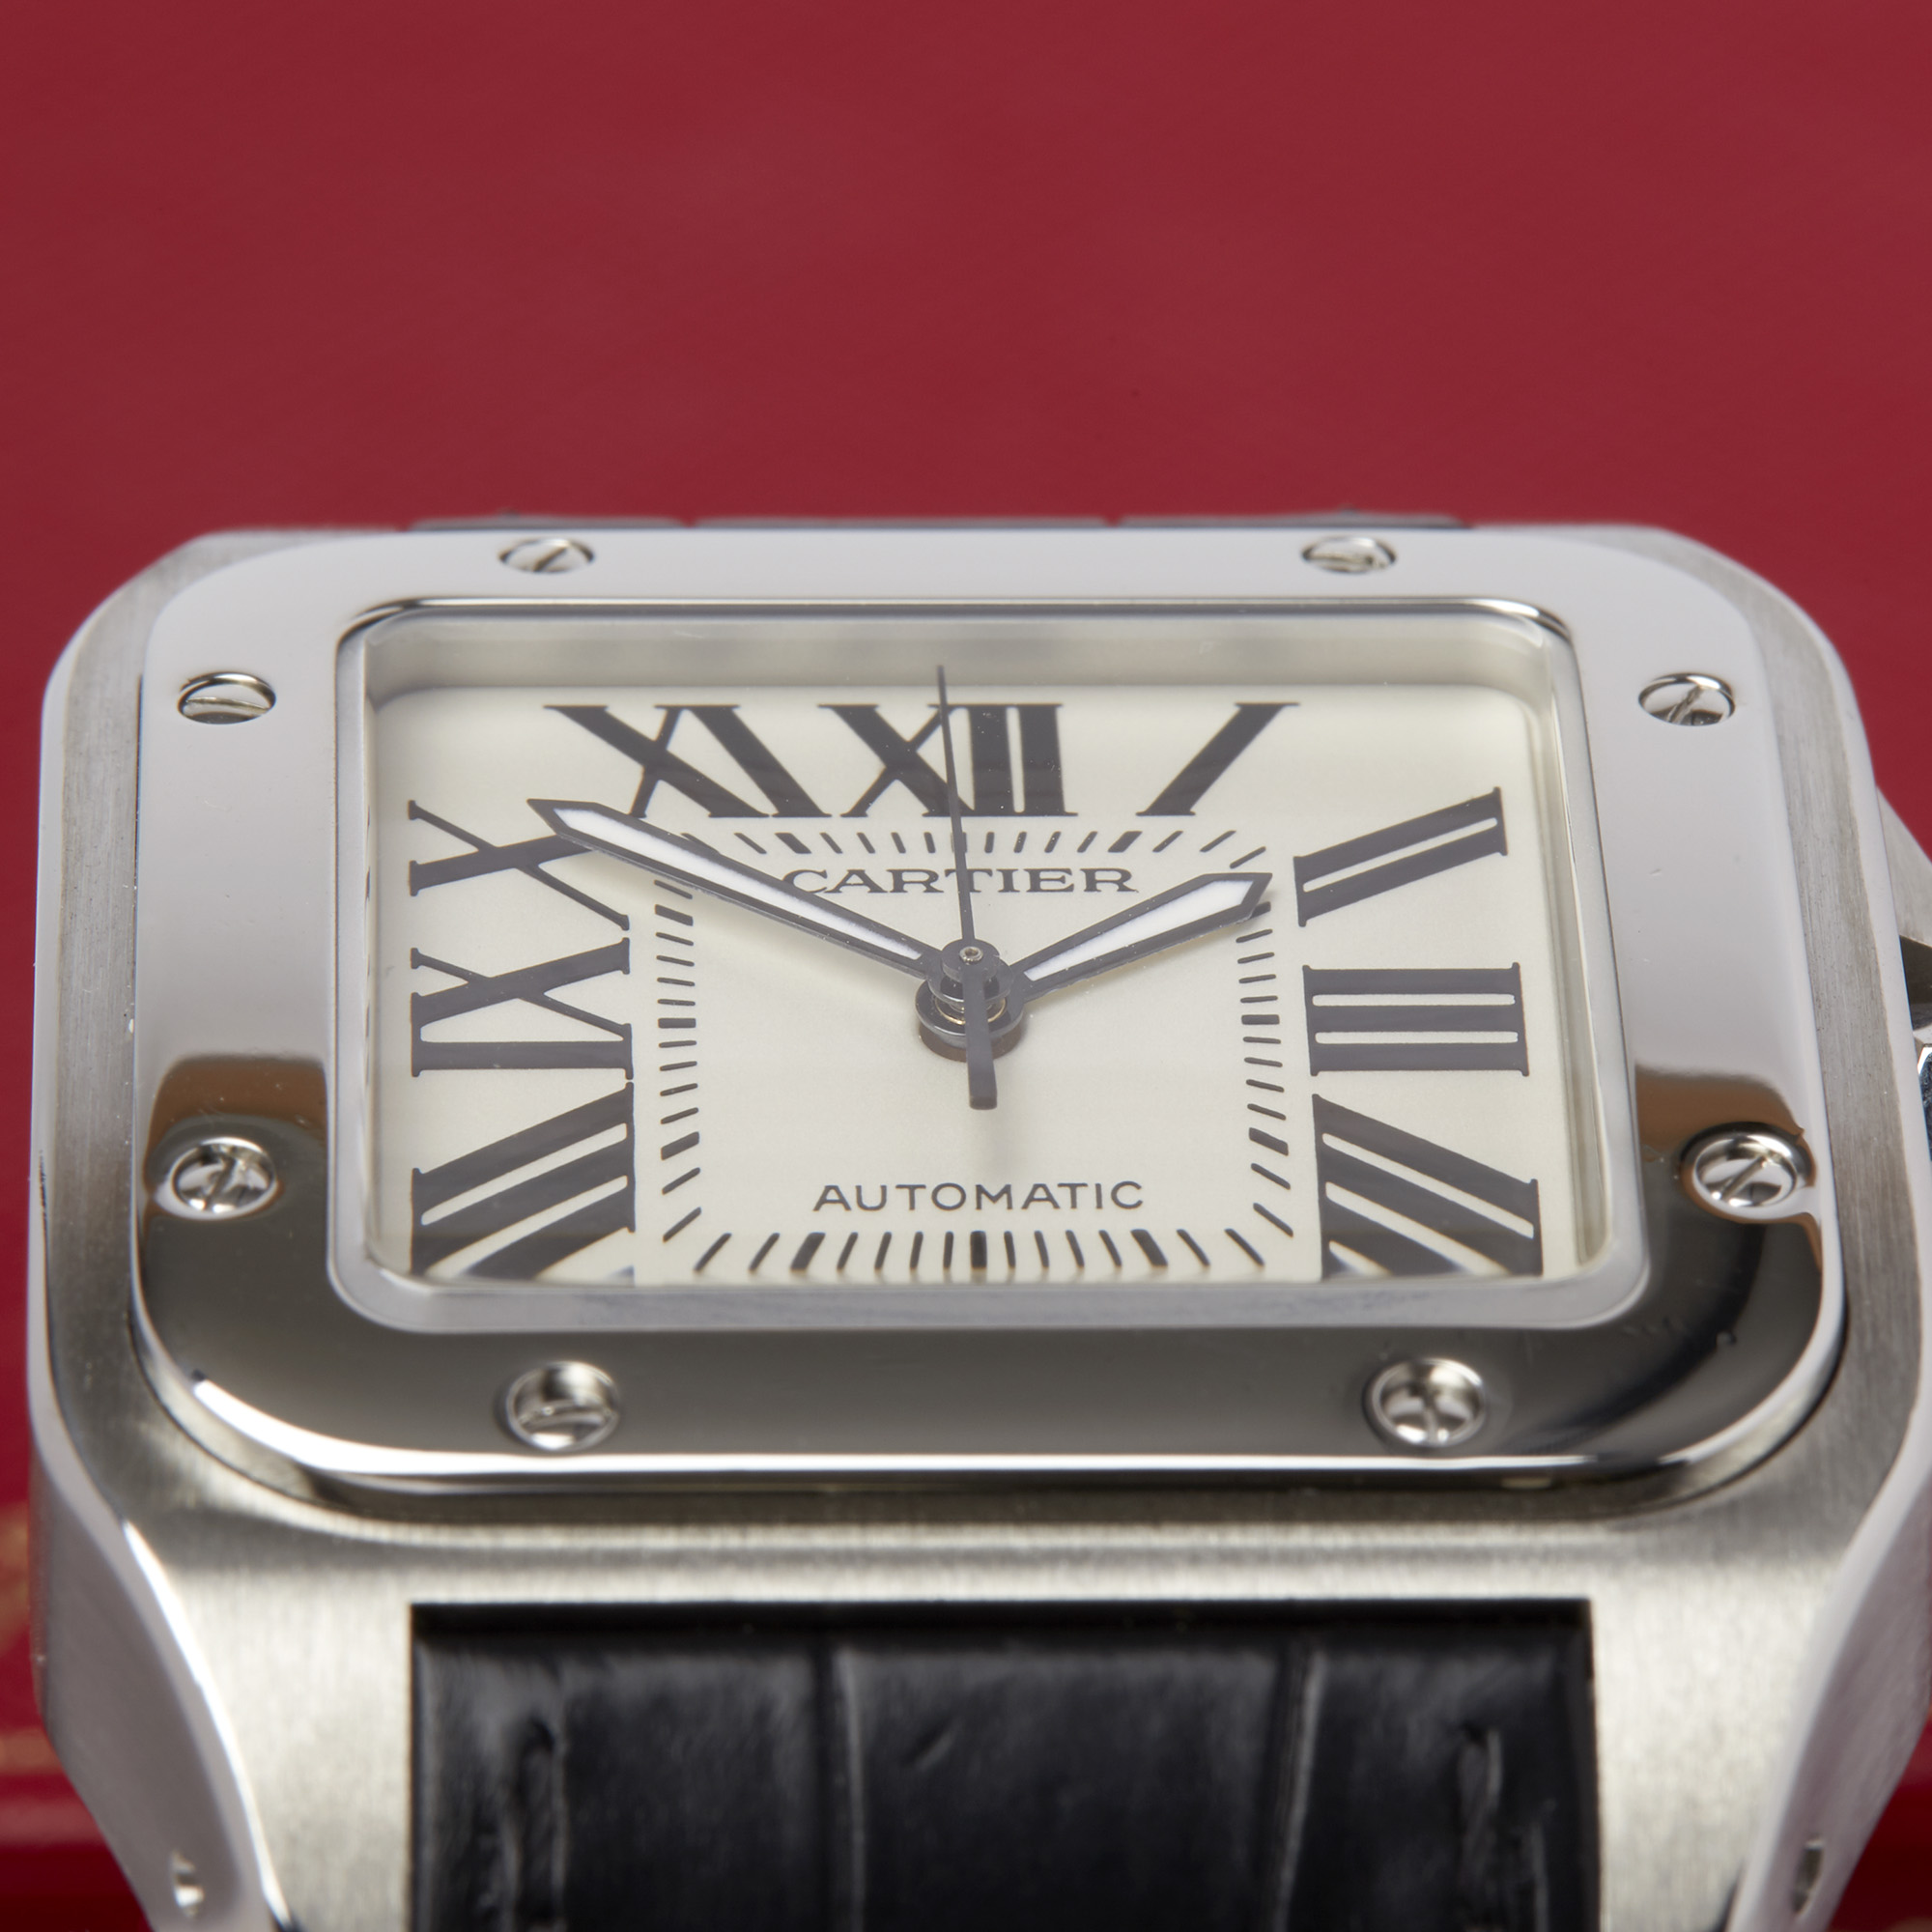 Cartier Santos 100 W20090X8 or 2656 Men Stainless Steel Chronograph XL Cartier Service Watch - Image 9 of 11